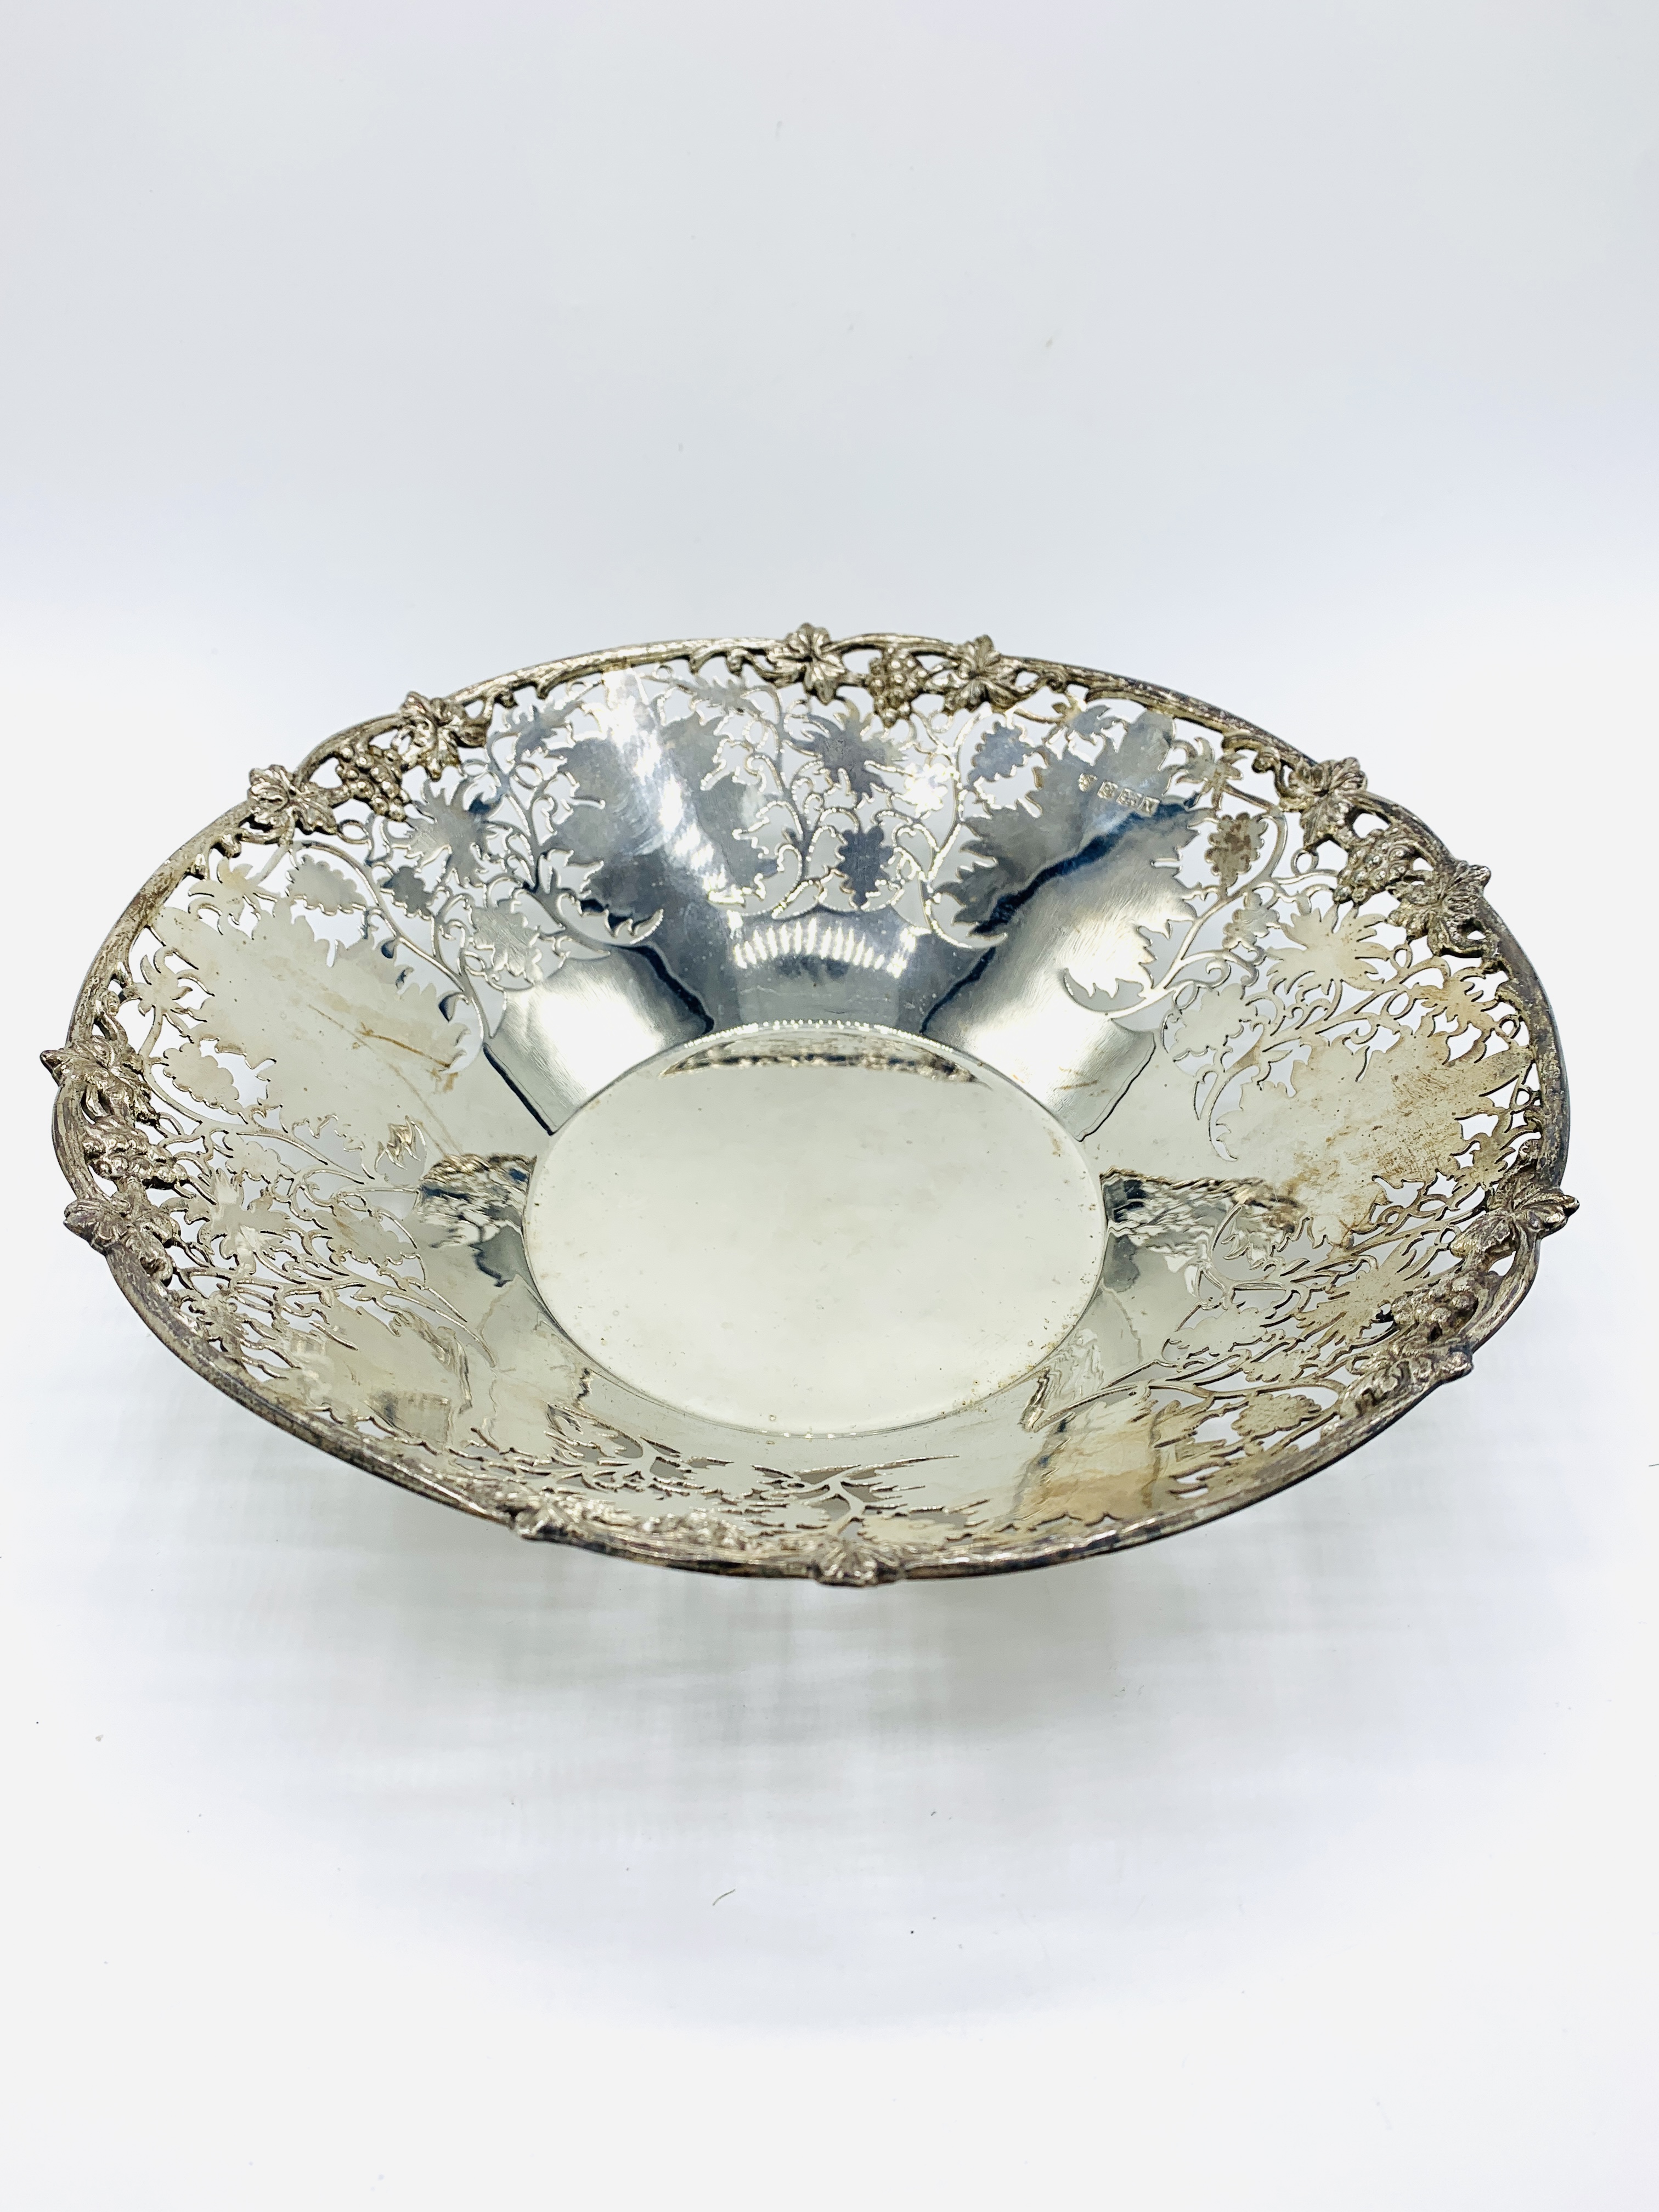 A silver pierced sided fruit bowl by J B Chatterley & Sons Ltd - Image 3 of 4